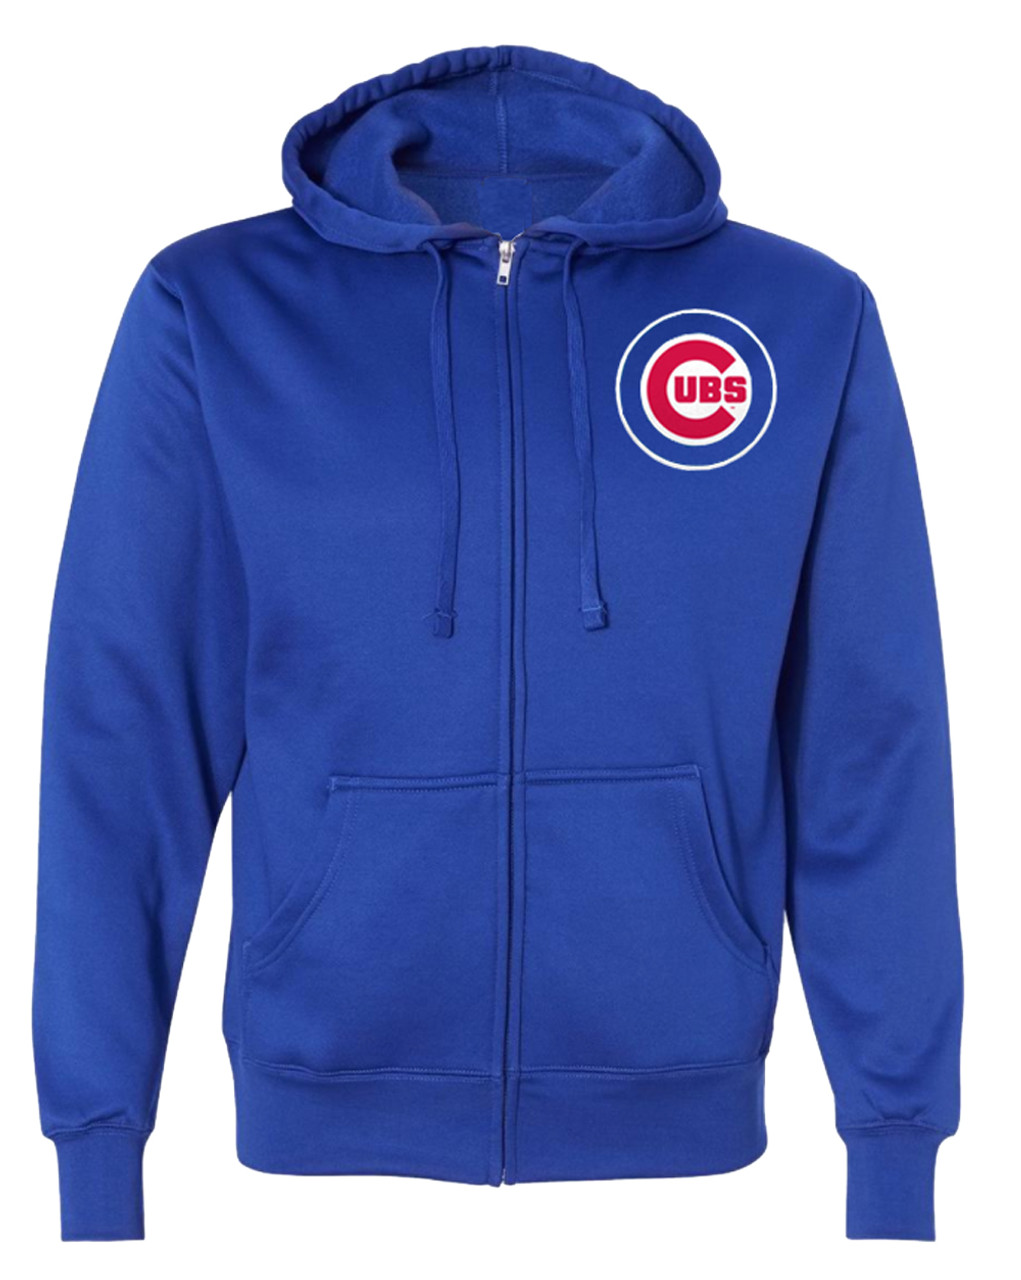 MLB MITCHELL & NESS CHICAGO CUBS HOODIE Men LARGE L Blue